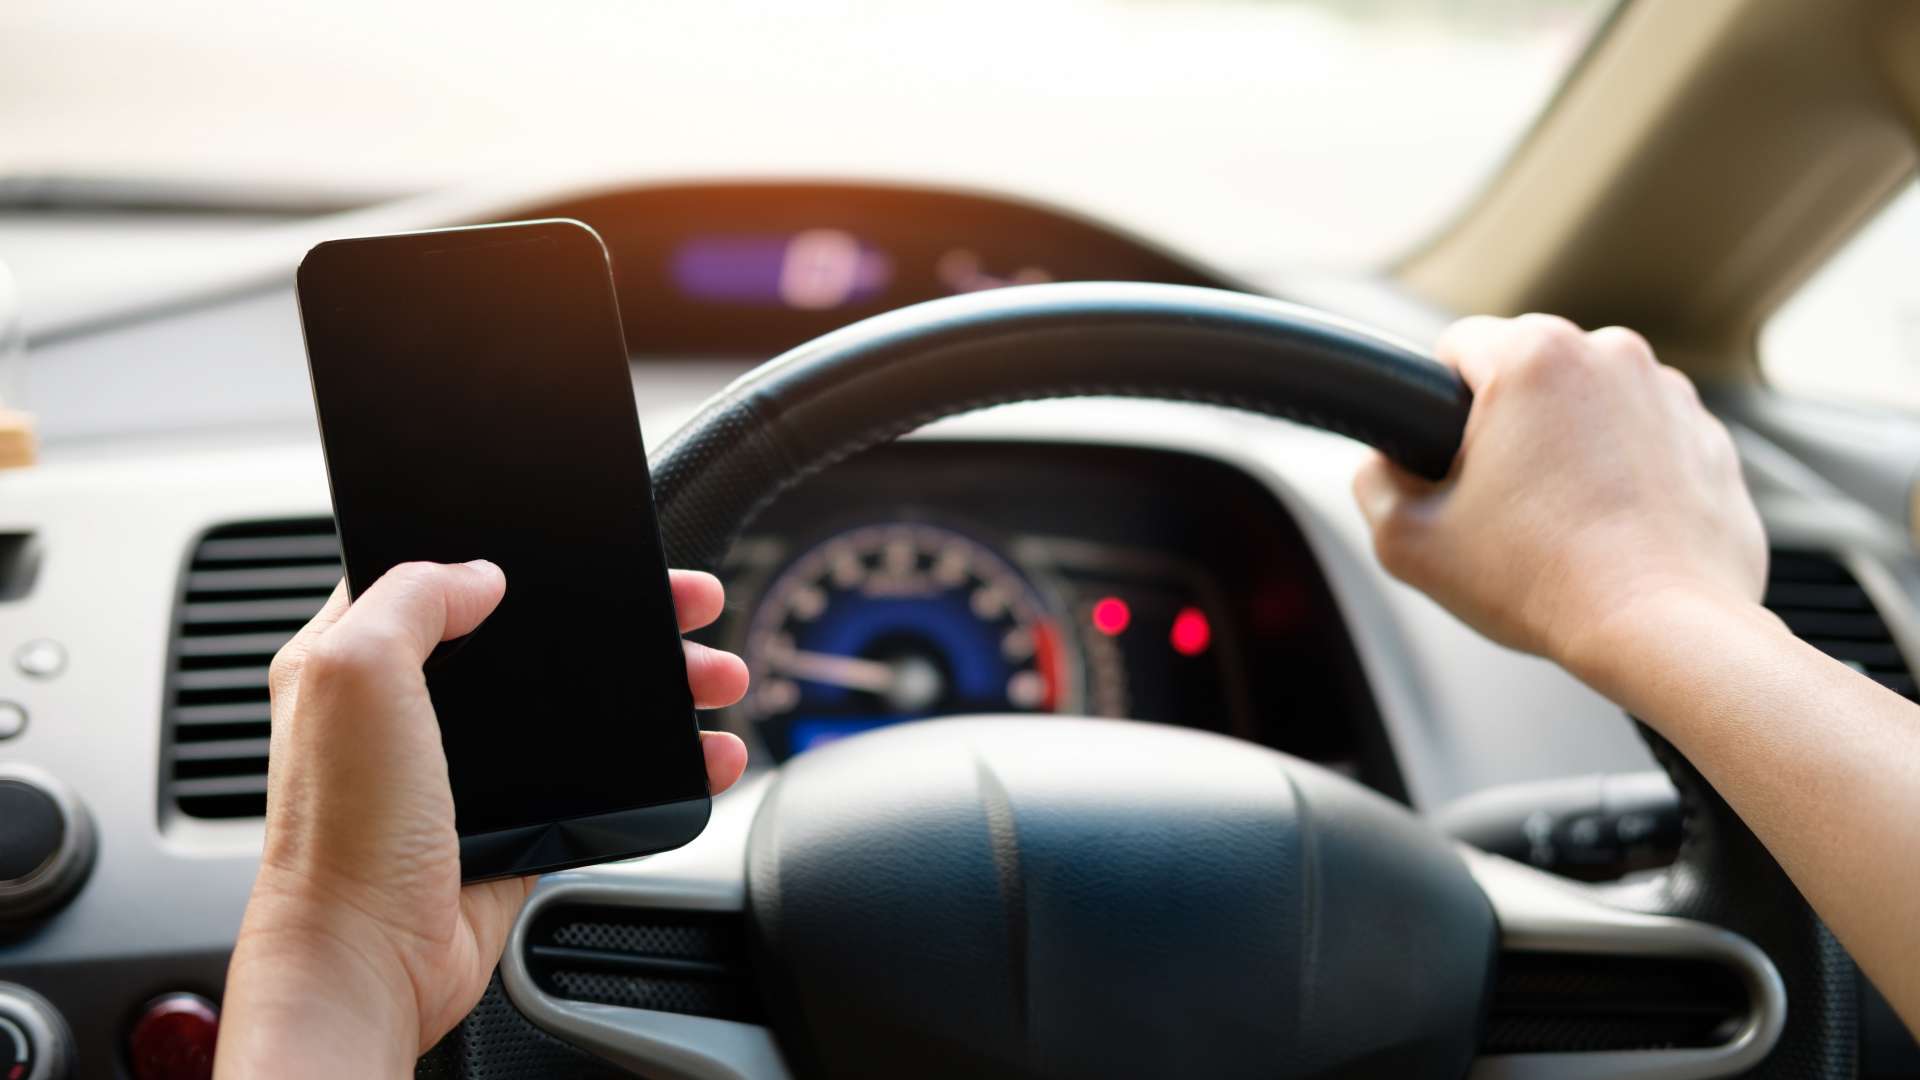 appen-achter-stuur-person-holding-black-smartphone-and-vehicle-steering-wheel-1028742